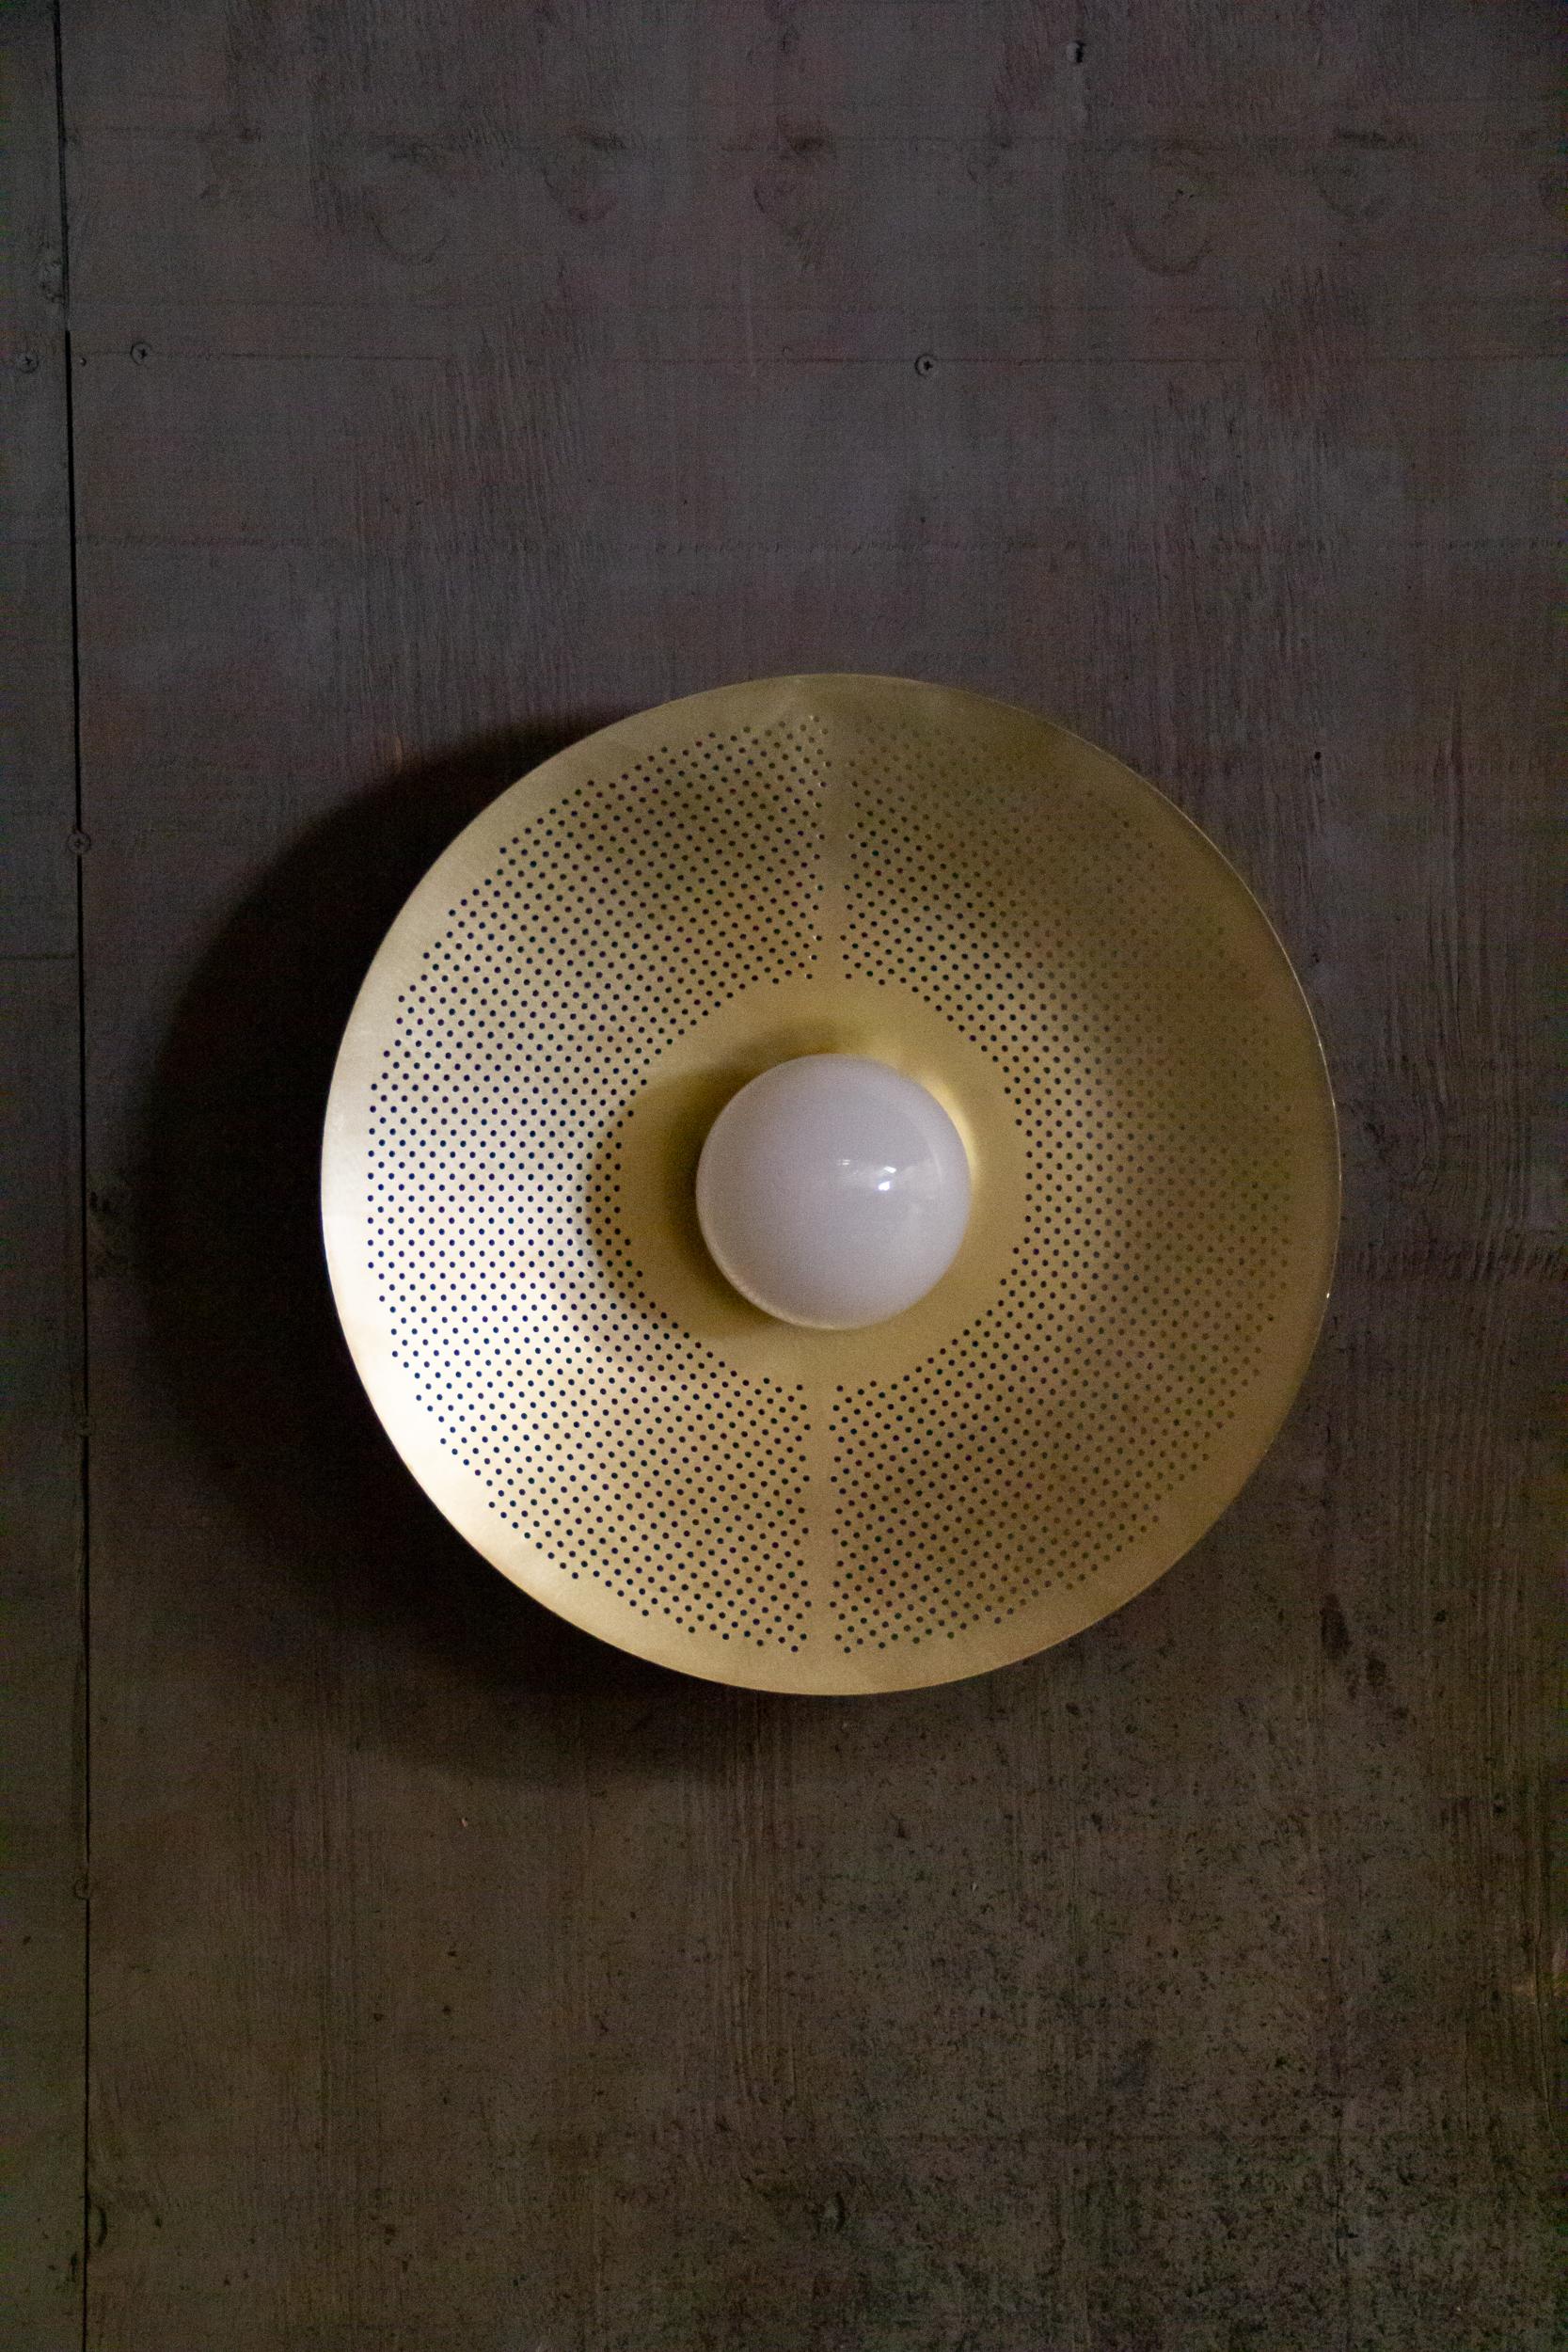 Arbotante Wall Lamp by Federico Stefanovich
Dimensions: D 46 x W 46 x H 18 cm
Material: Brass

As the Candelera collection, this piece is designed with the aid of parametric
software to create a cut pattern around the screen that adds a unique